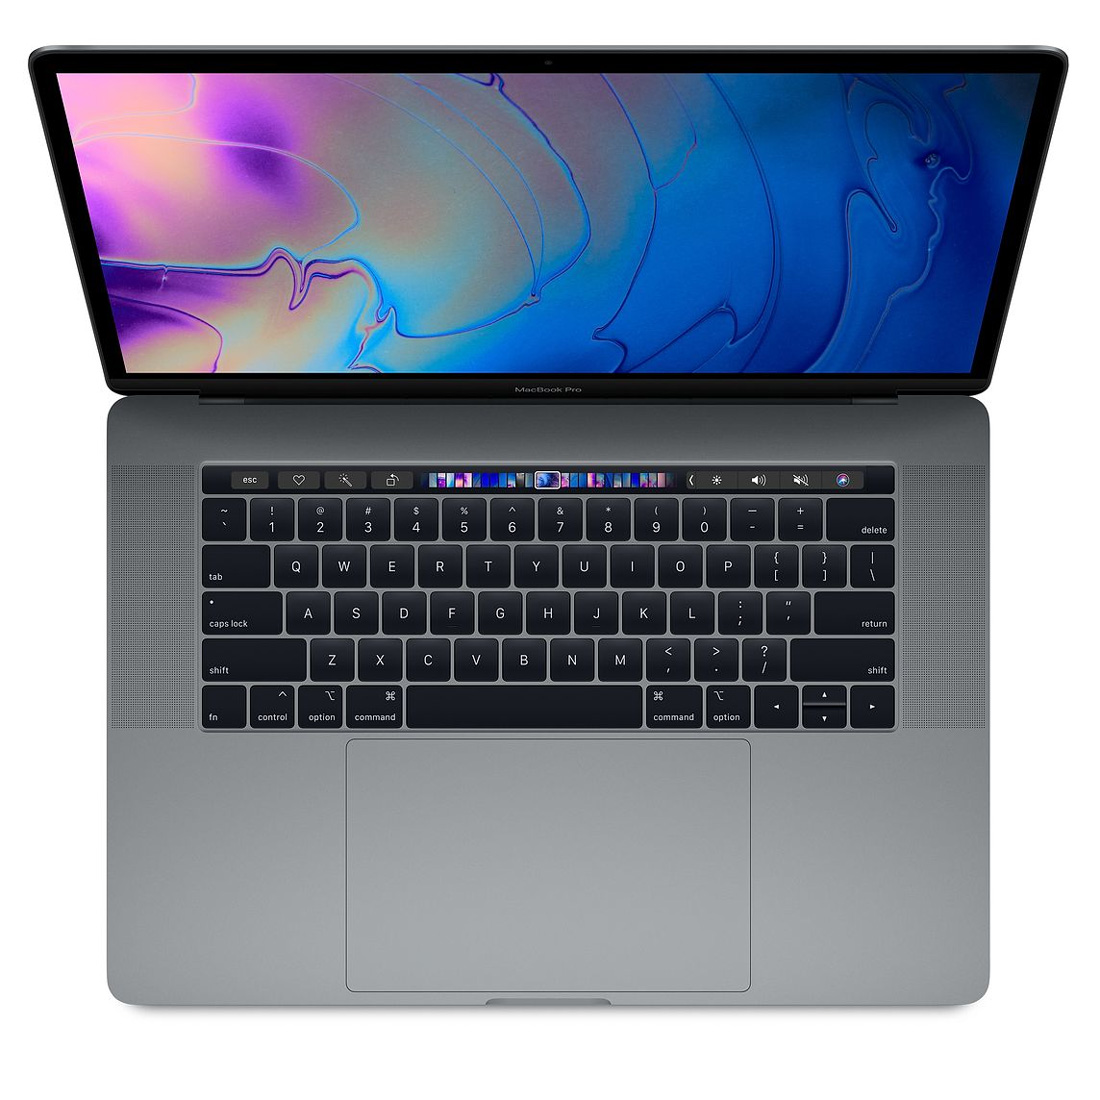 Apple MacBook Pro 13inch – 2.4GHz Quad-Core Processor with Turbo Boost up  to 4.1GH, 256GB SSD, 8GB Ram, Core i5, Model 2019 – Namzy Phones